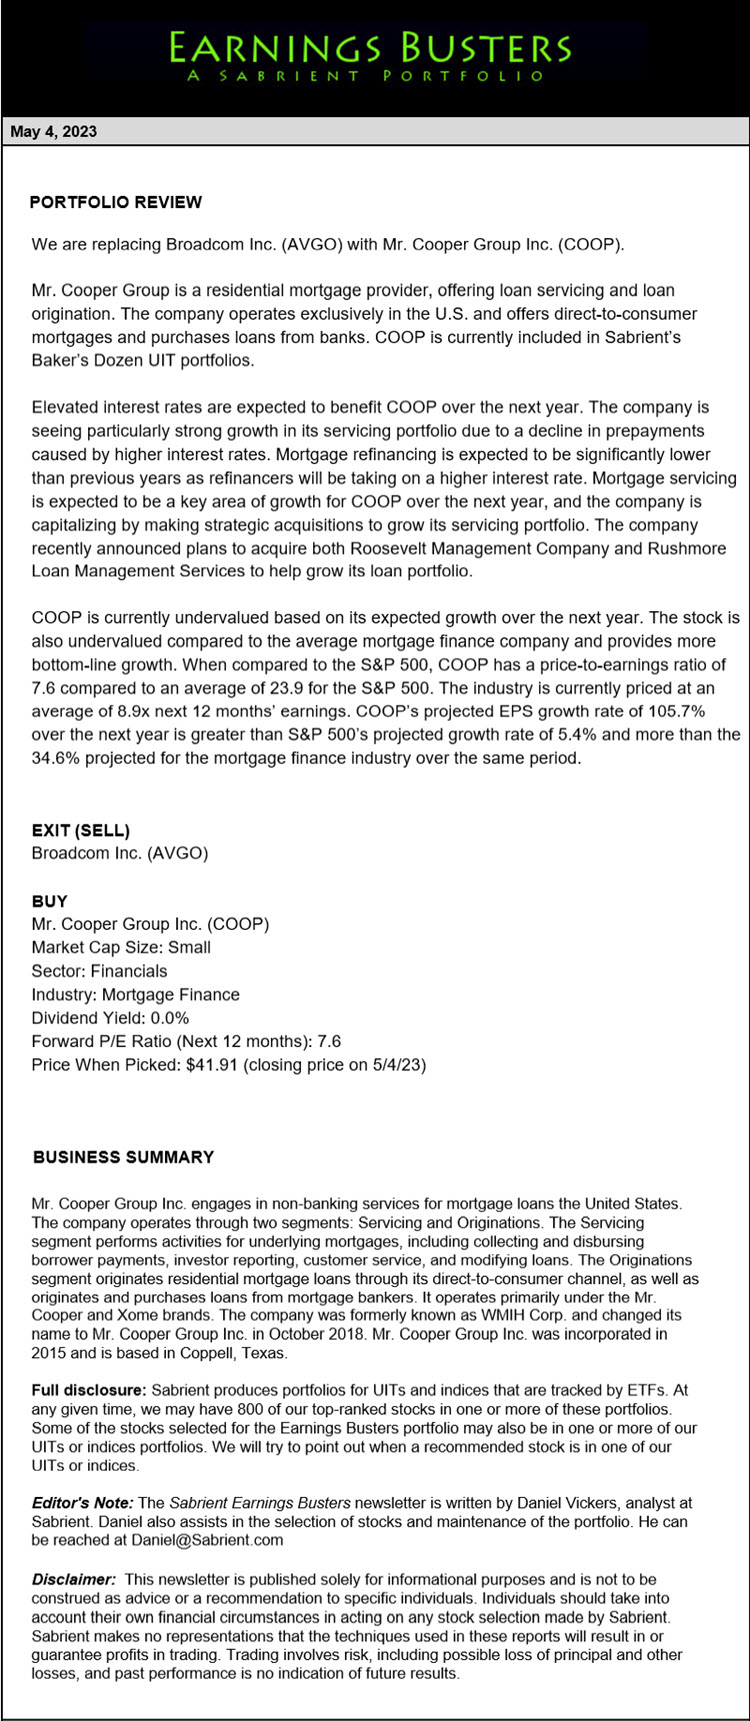 Earnings Busters Newsletter - May 4, 2023